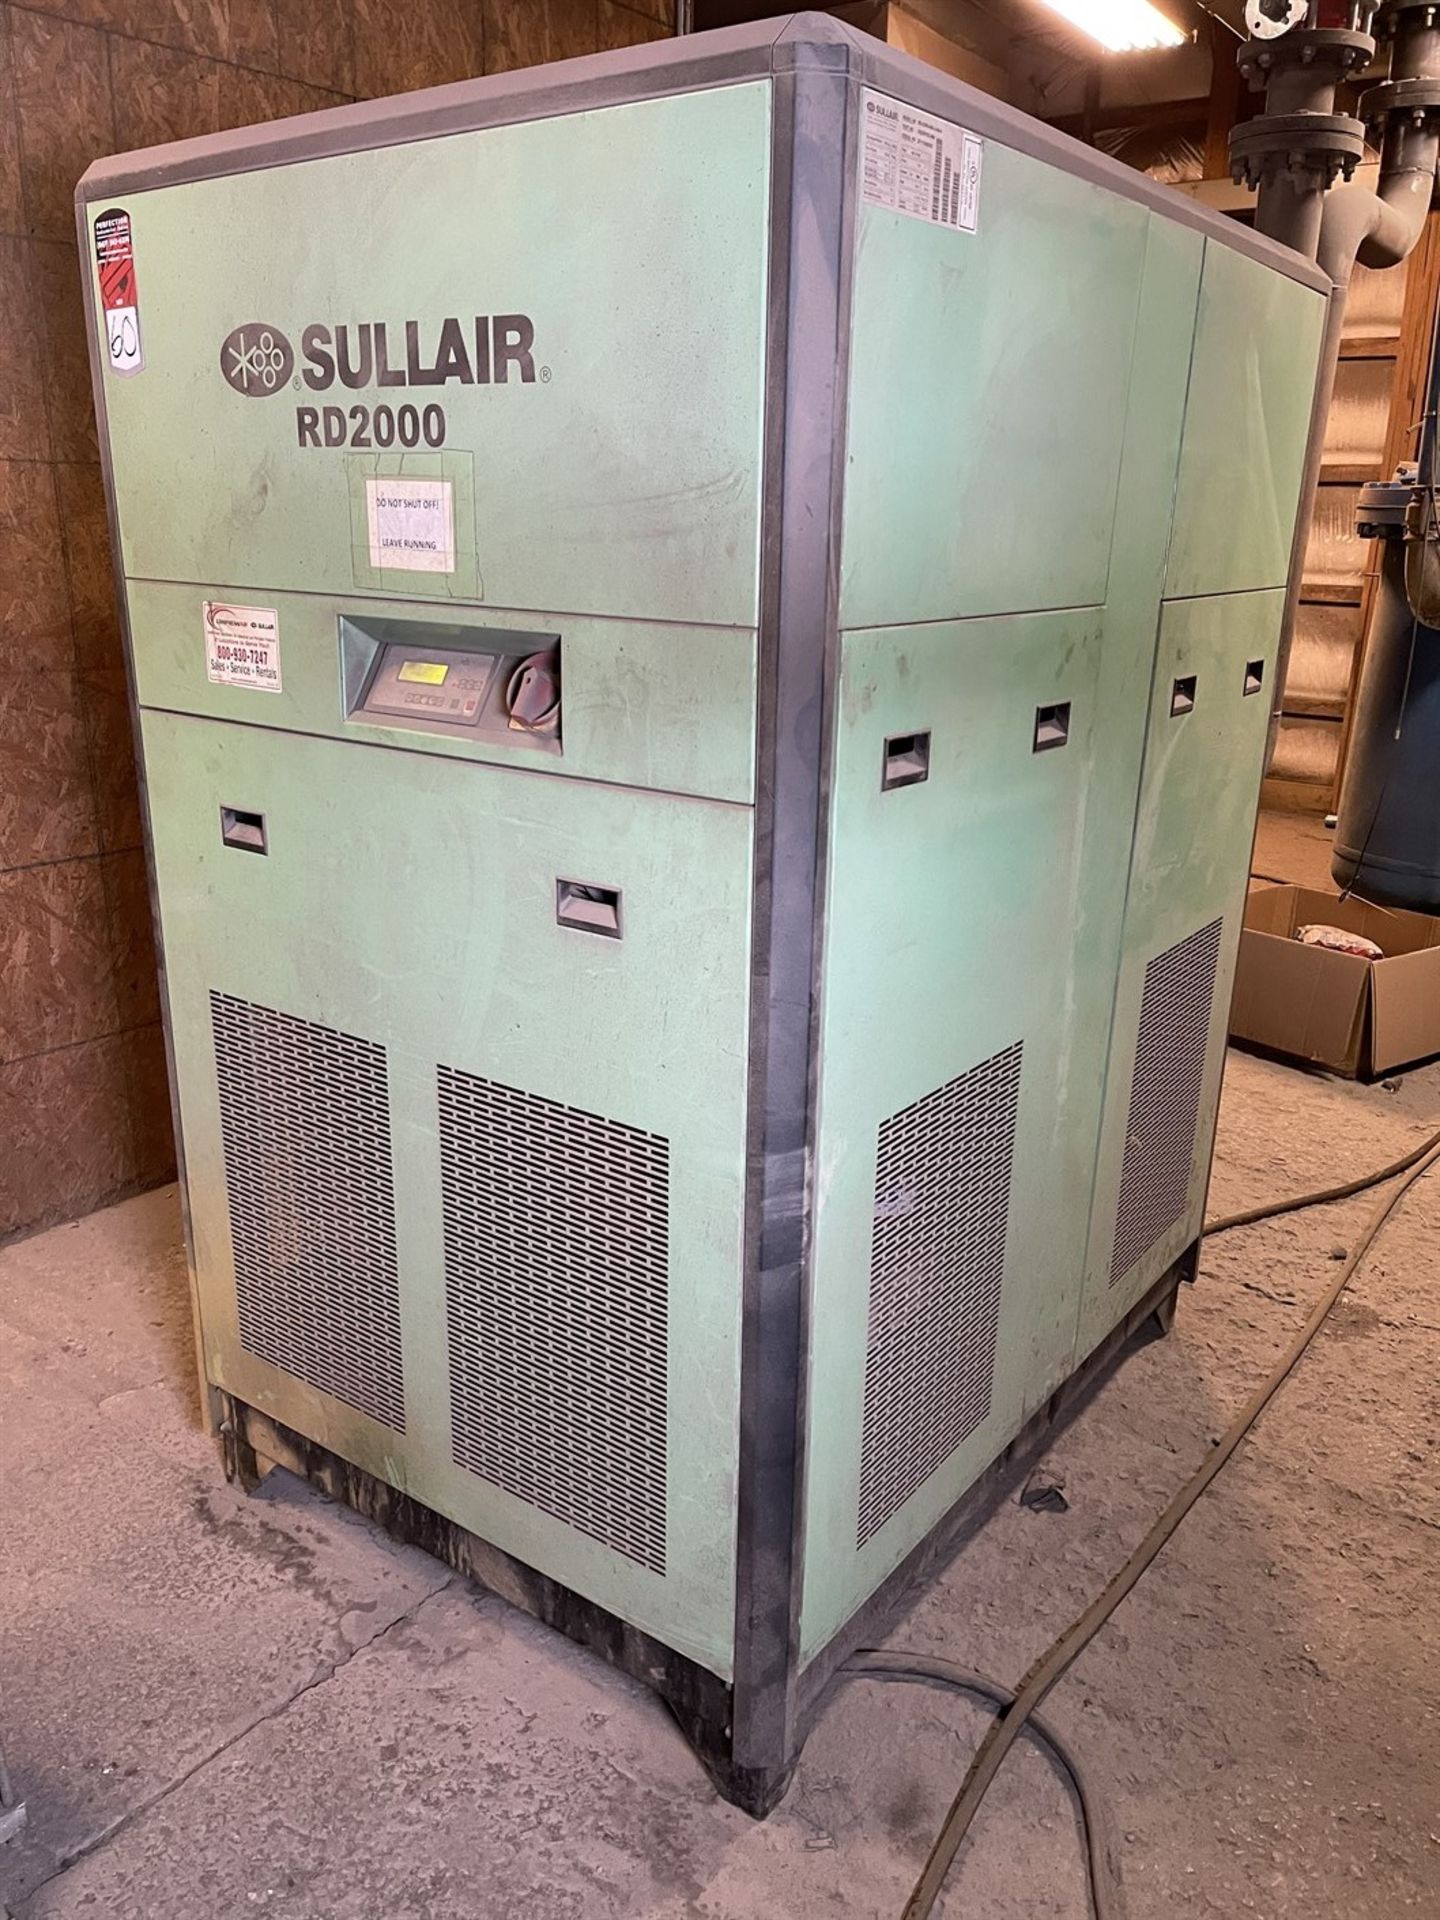 Sullair RD-2000 Refrigerated Air Dryer, s/n 2211SA0653, (Blast/Paint Building)